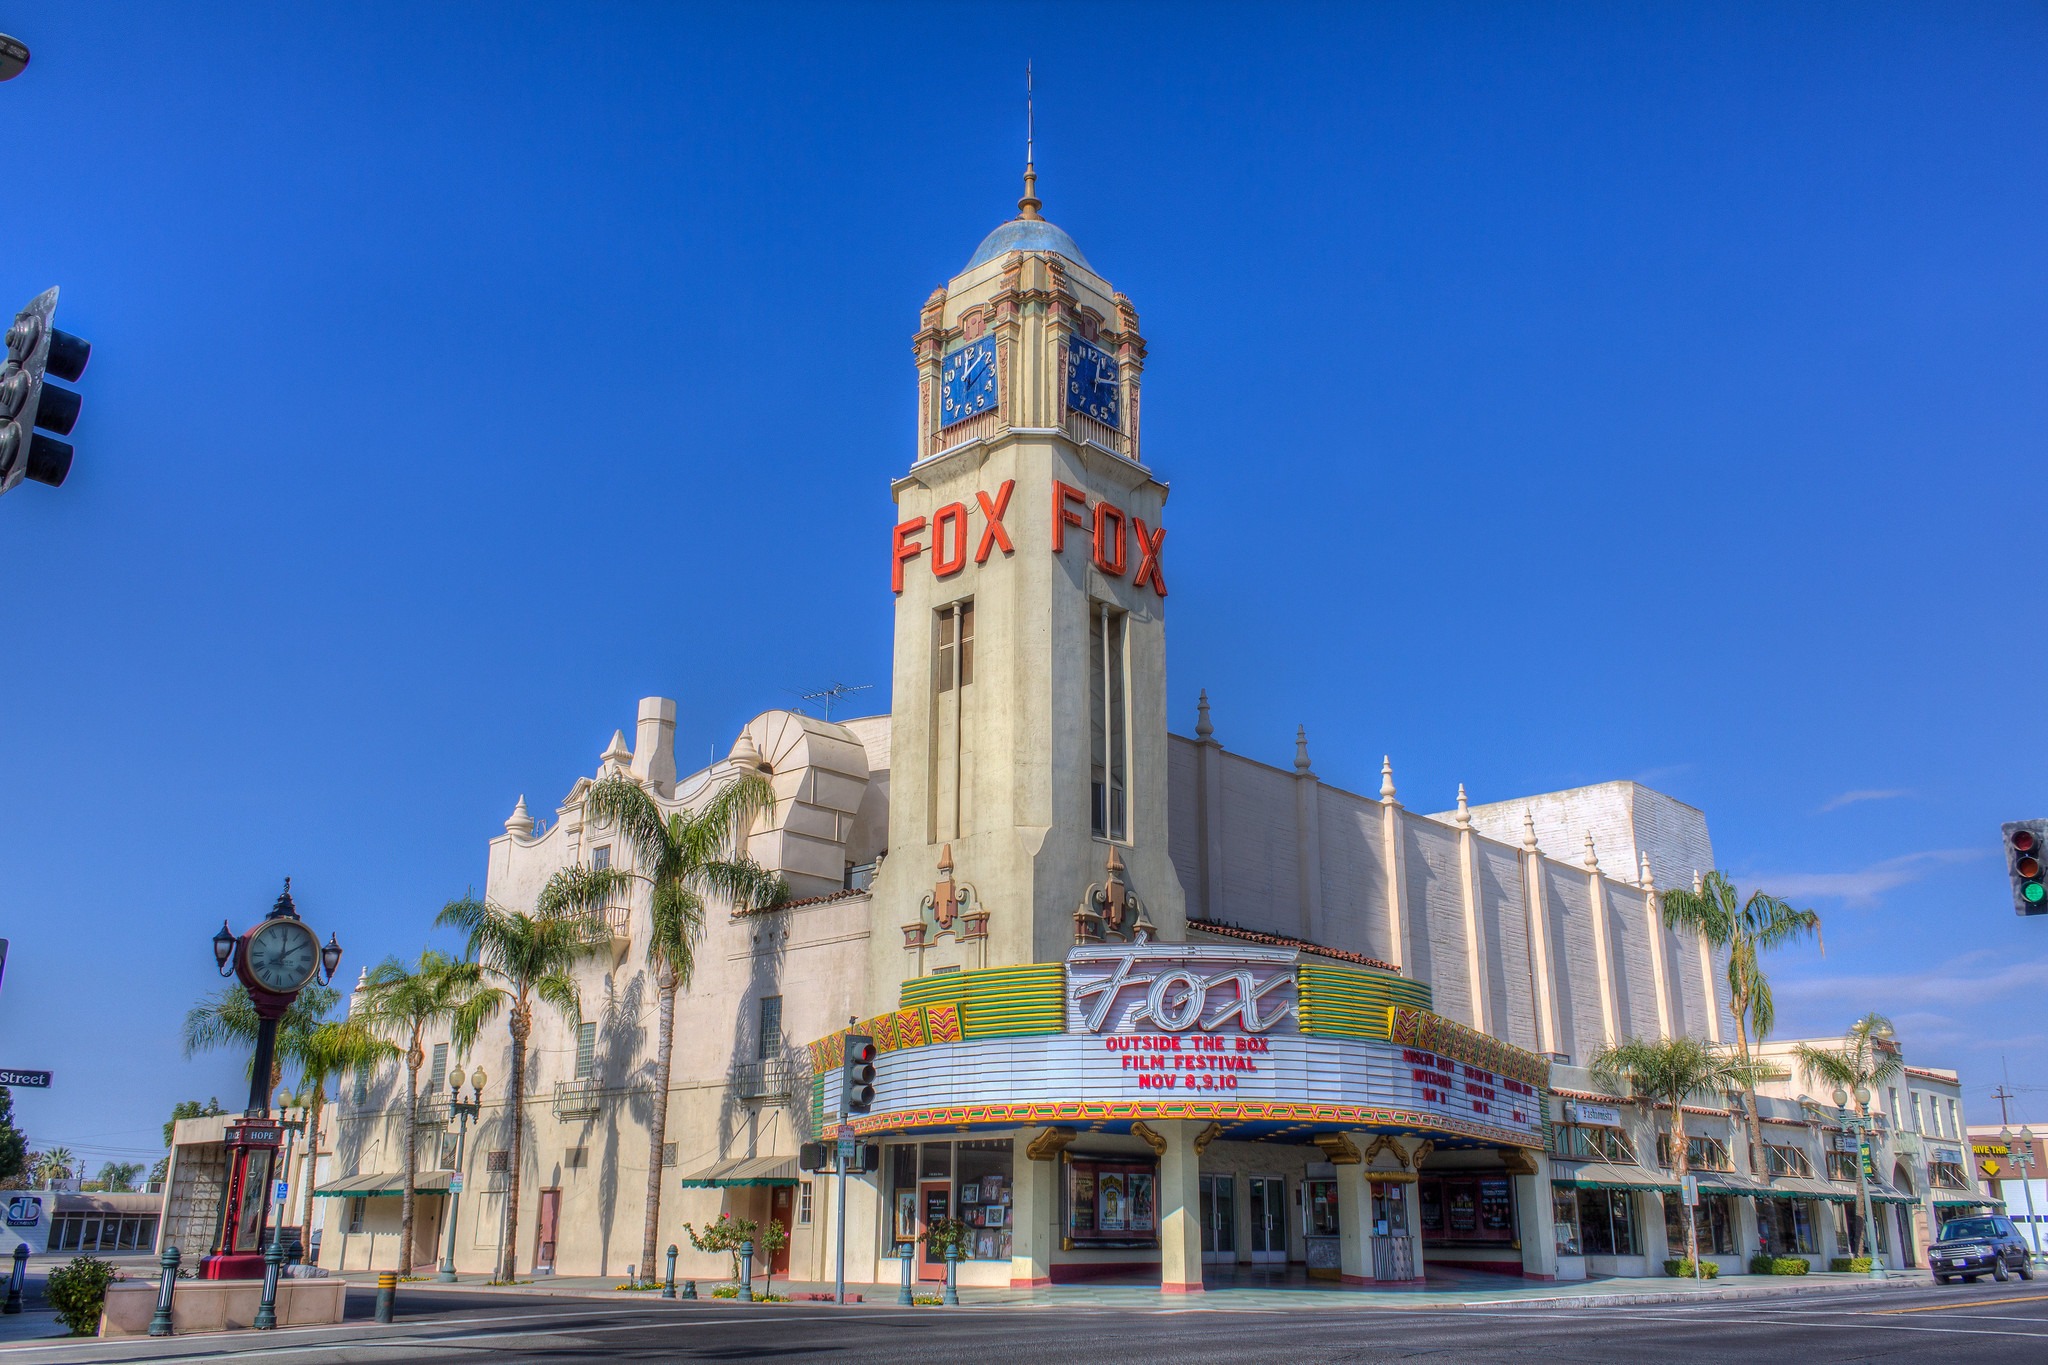 The Bakersfield Fox Theater